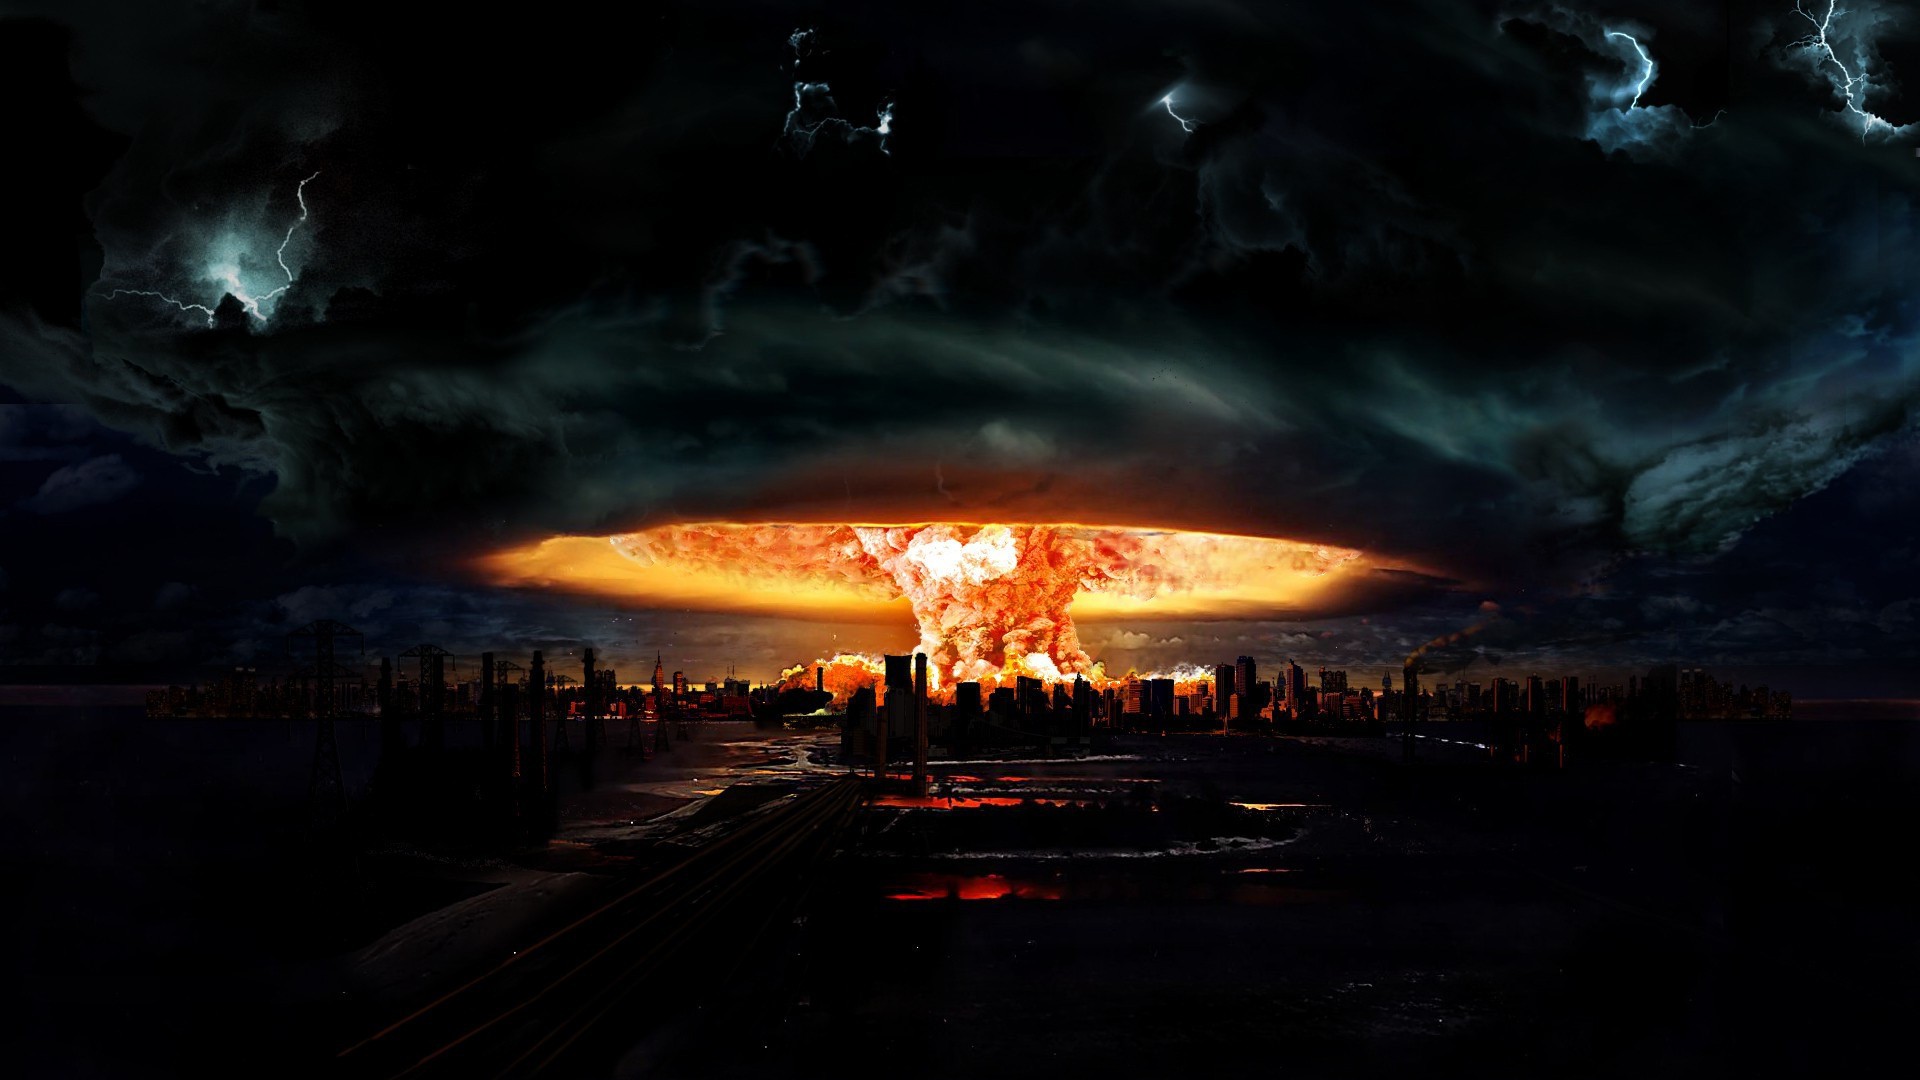 Nuclear Mushroom Clouds Fire Apocalyptic Explosion Atomic Bomb Digital Art Space Eruption 1920x1080